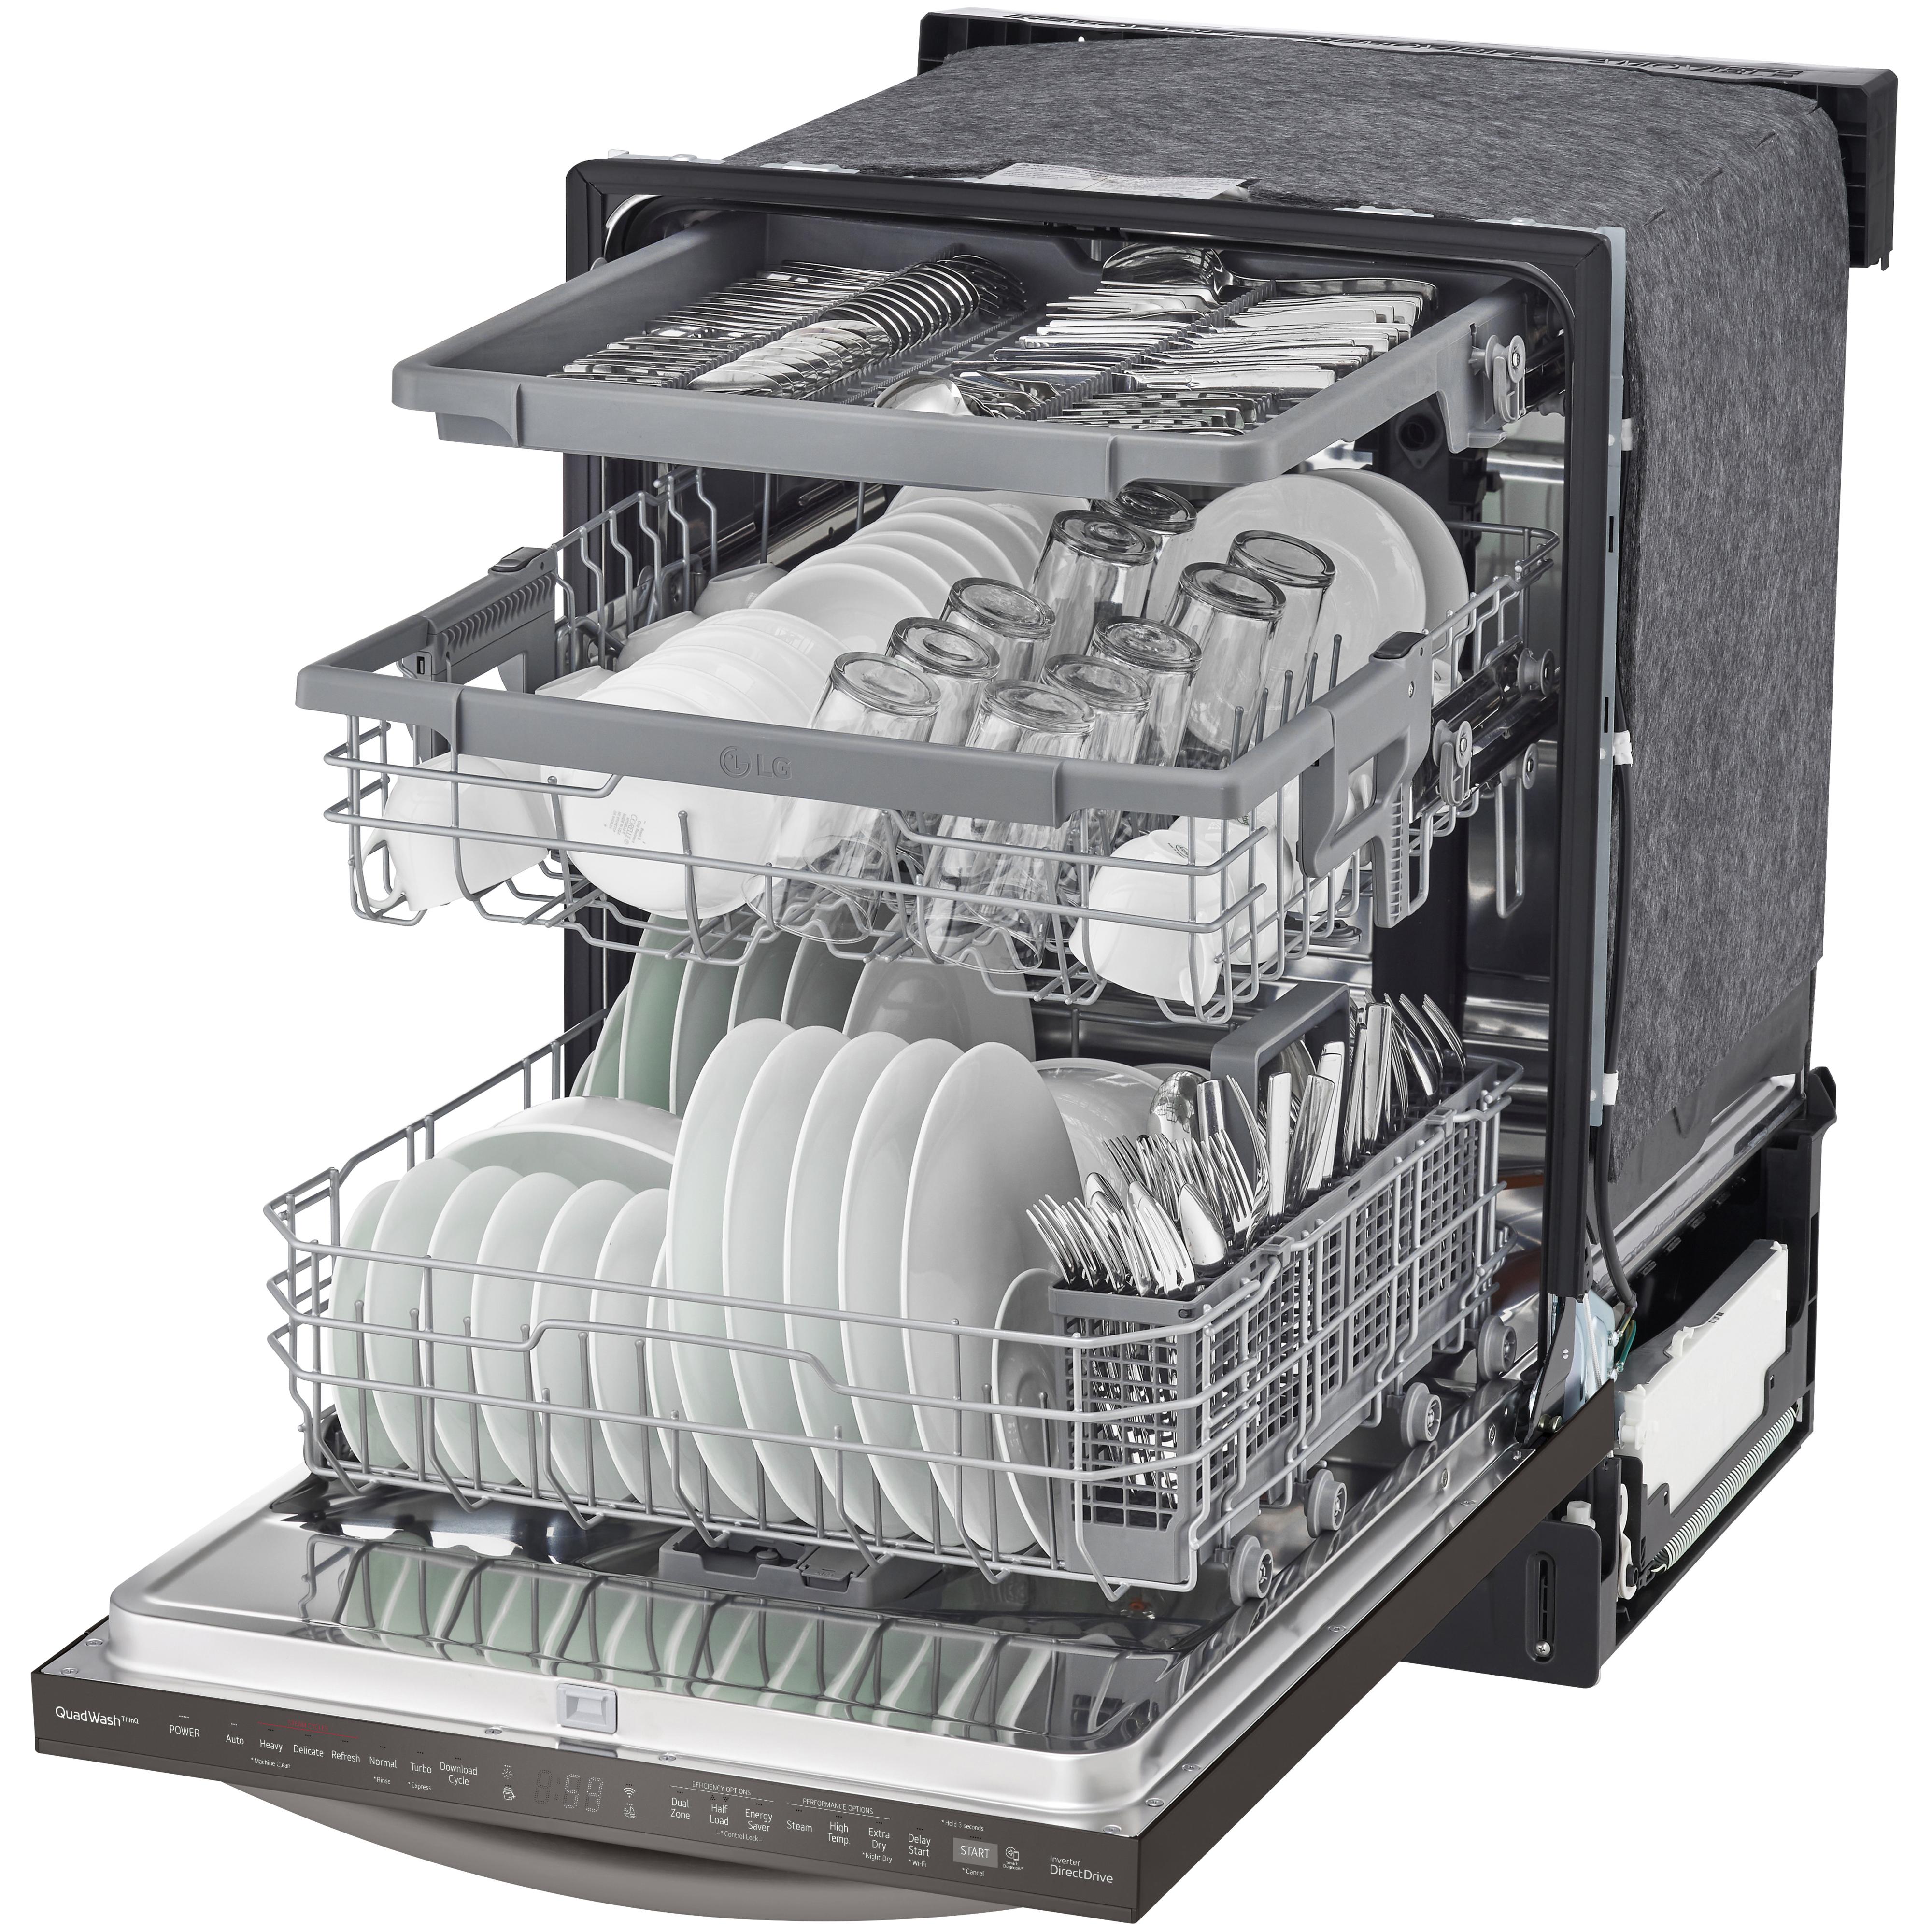 LG 24-inch Built-in Dishwasher with TrueSteam? LDTS5552D